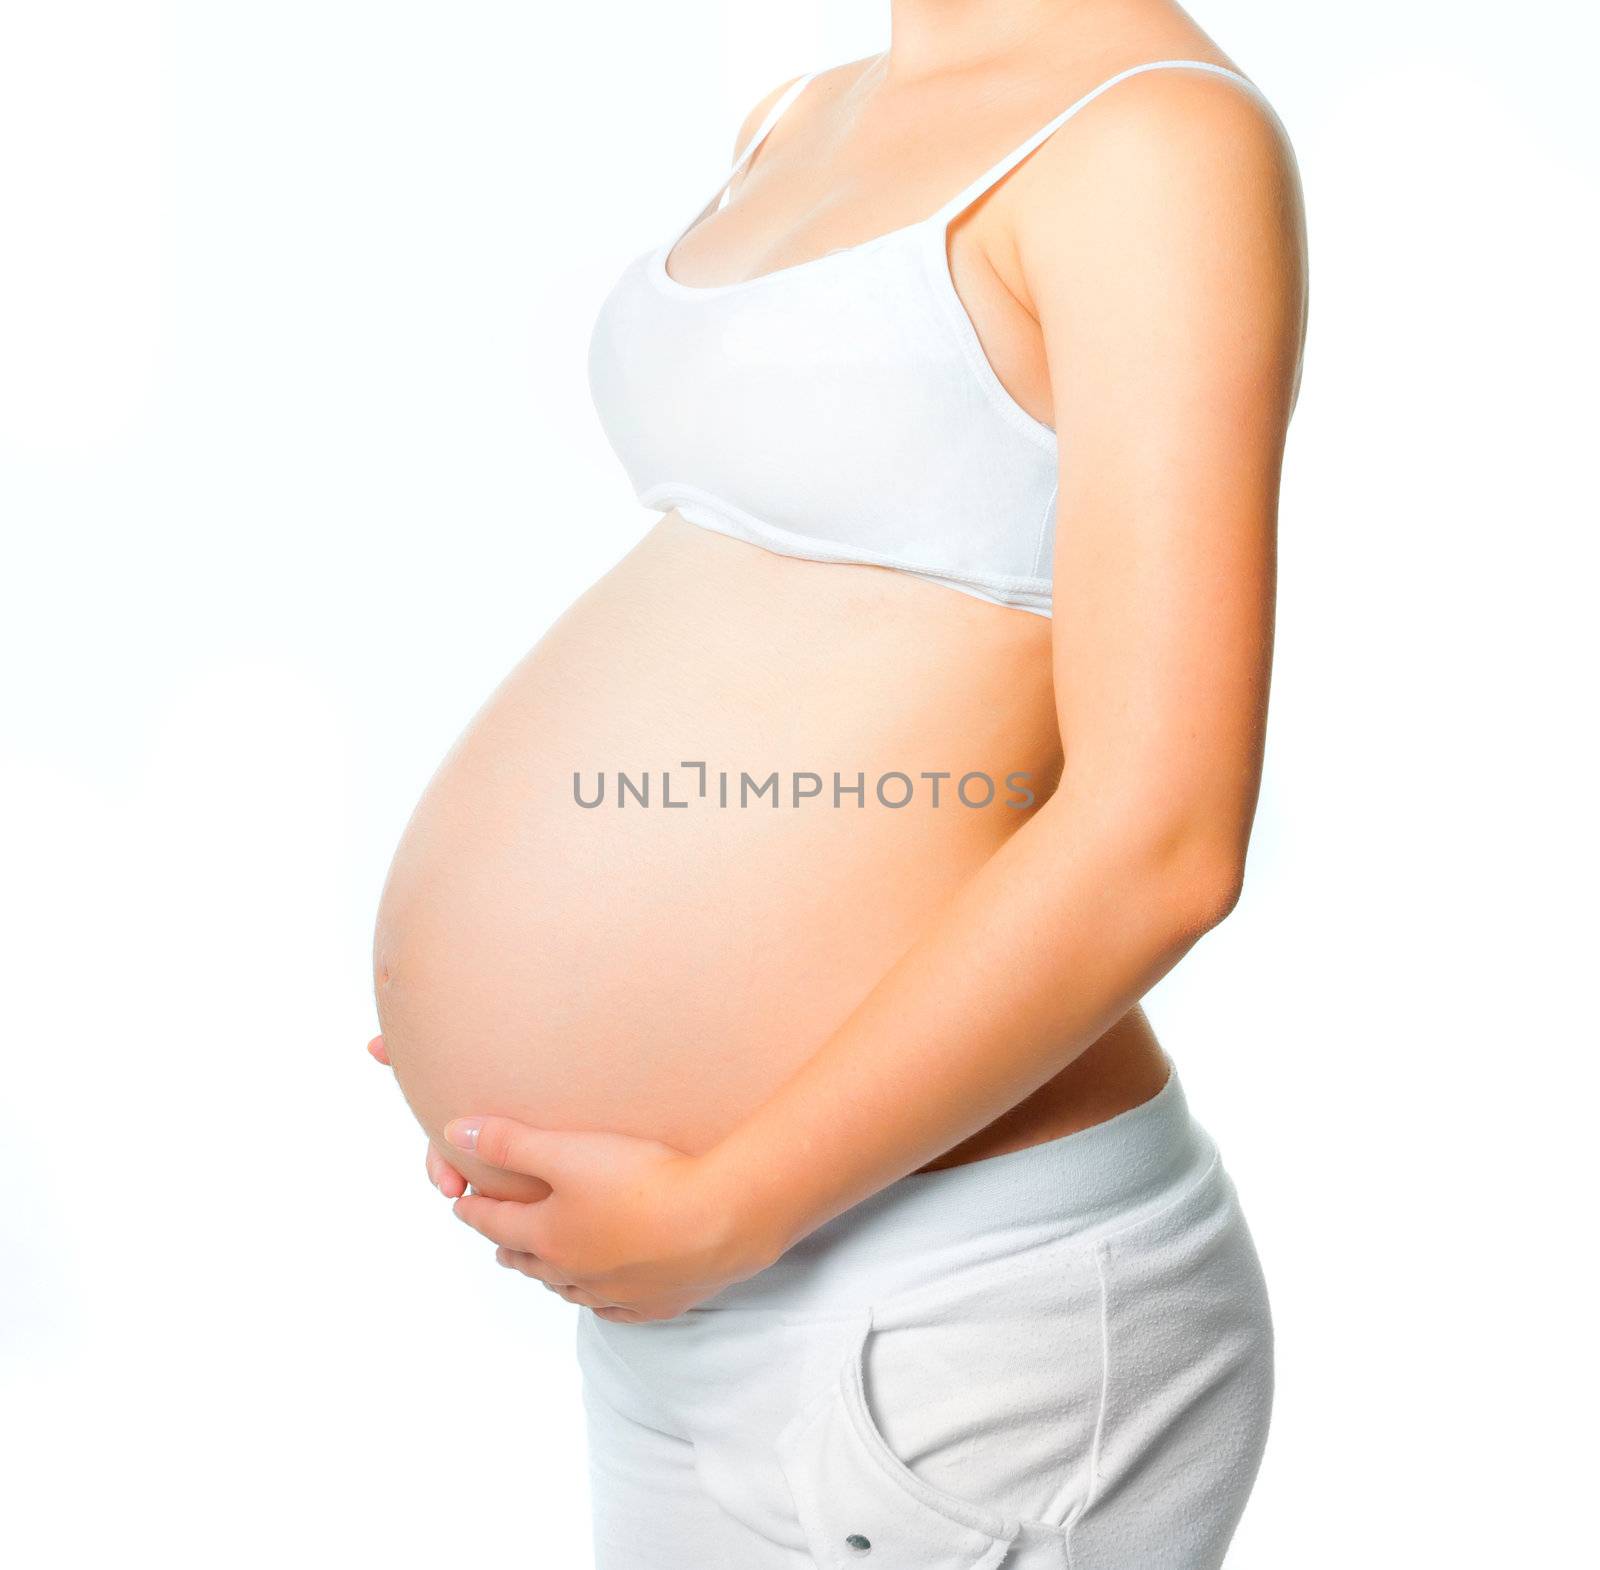 pregnant young woman isolated on a white